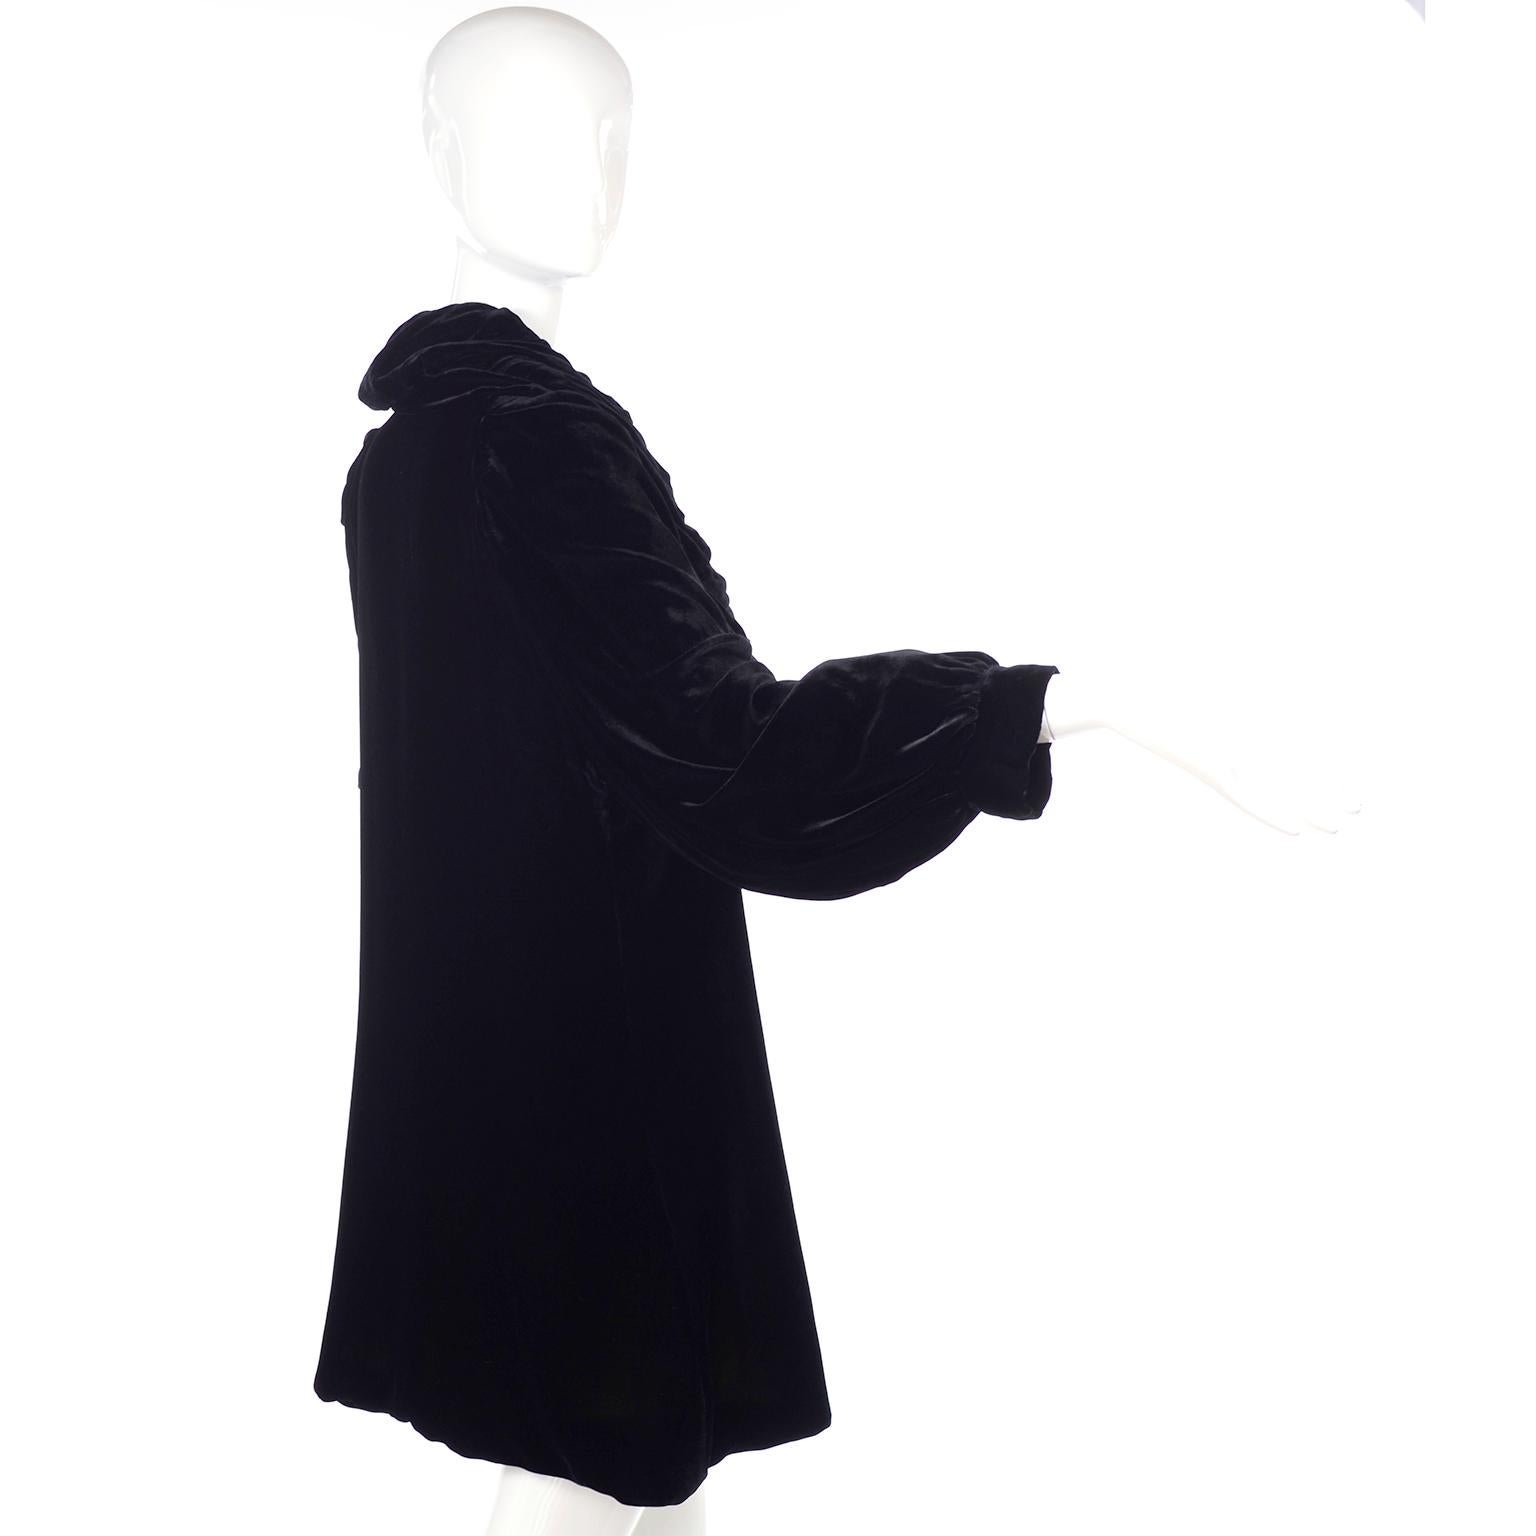 Vintage 1910s Black Velvet Evening Coat W/ Gathered Collar & Puff Sleeves In Excellent Condition For Sale In Portland, OR